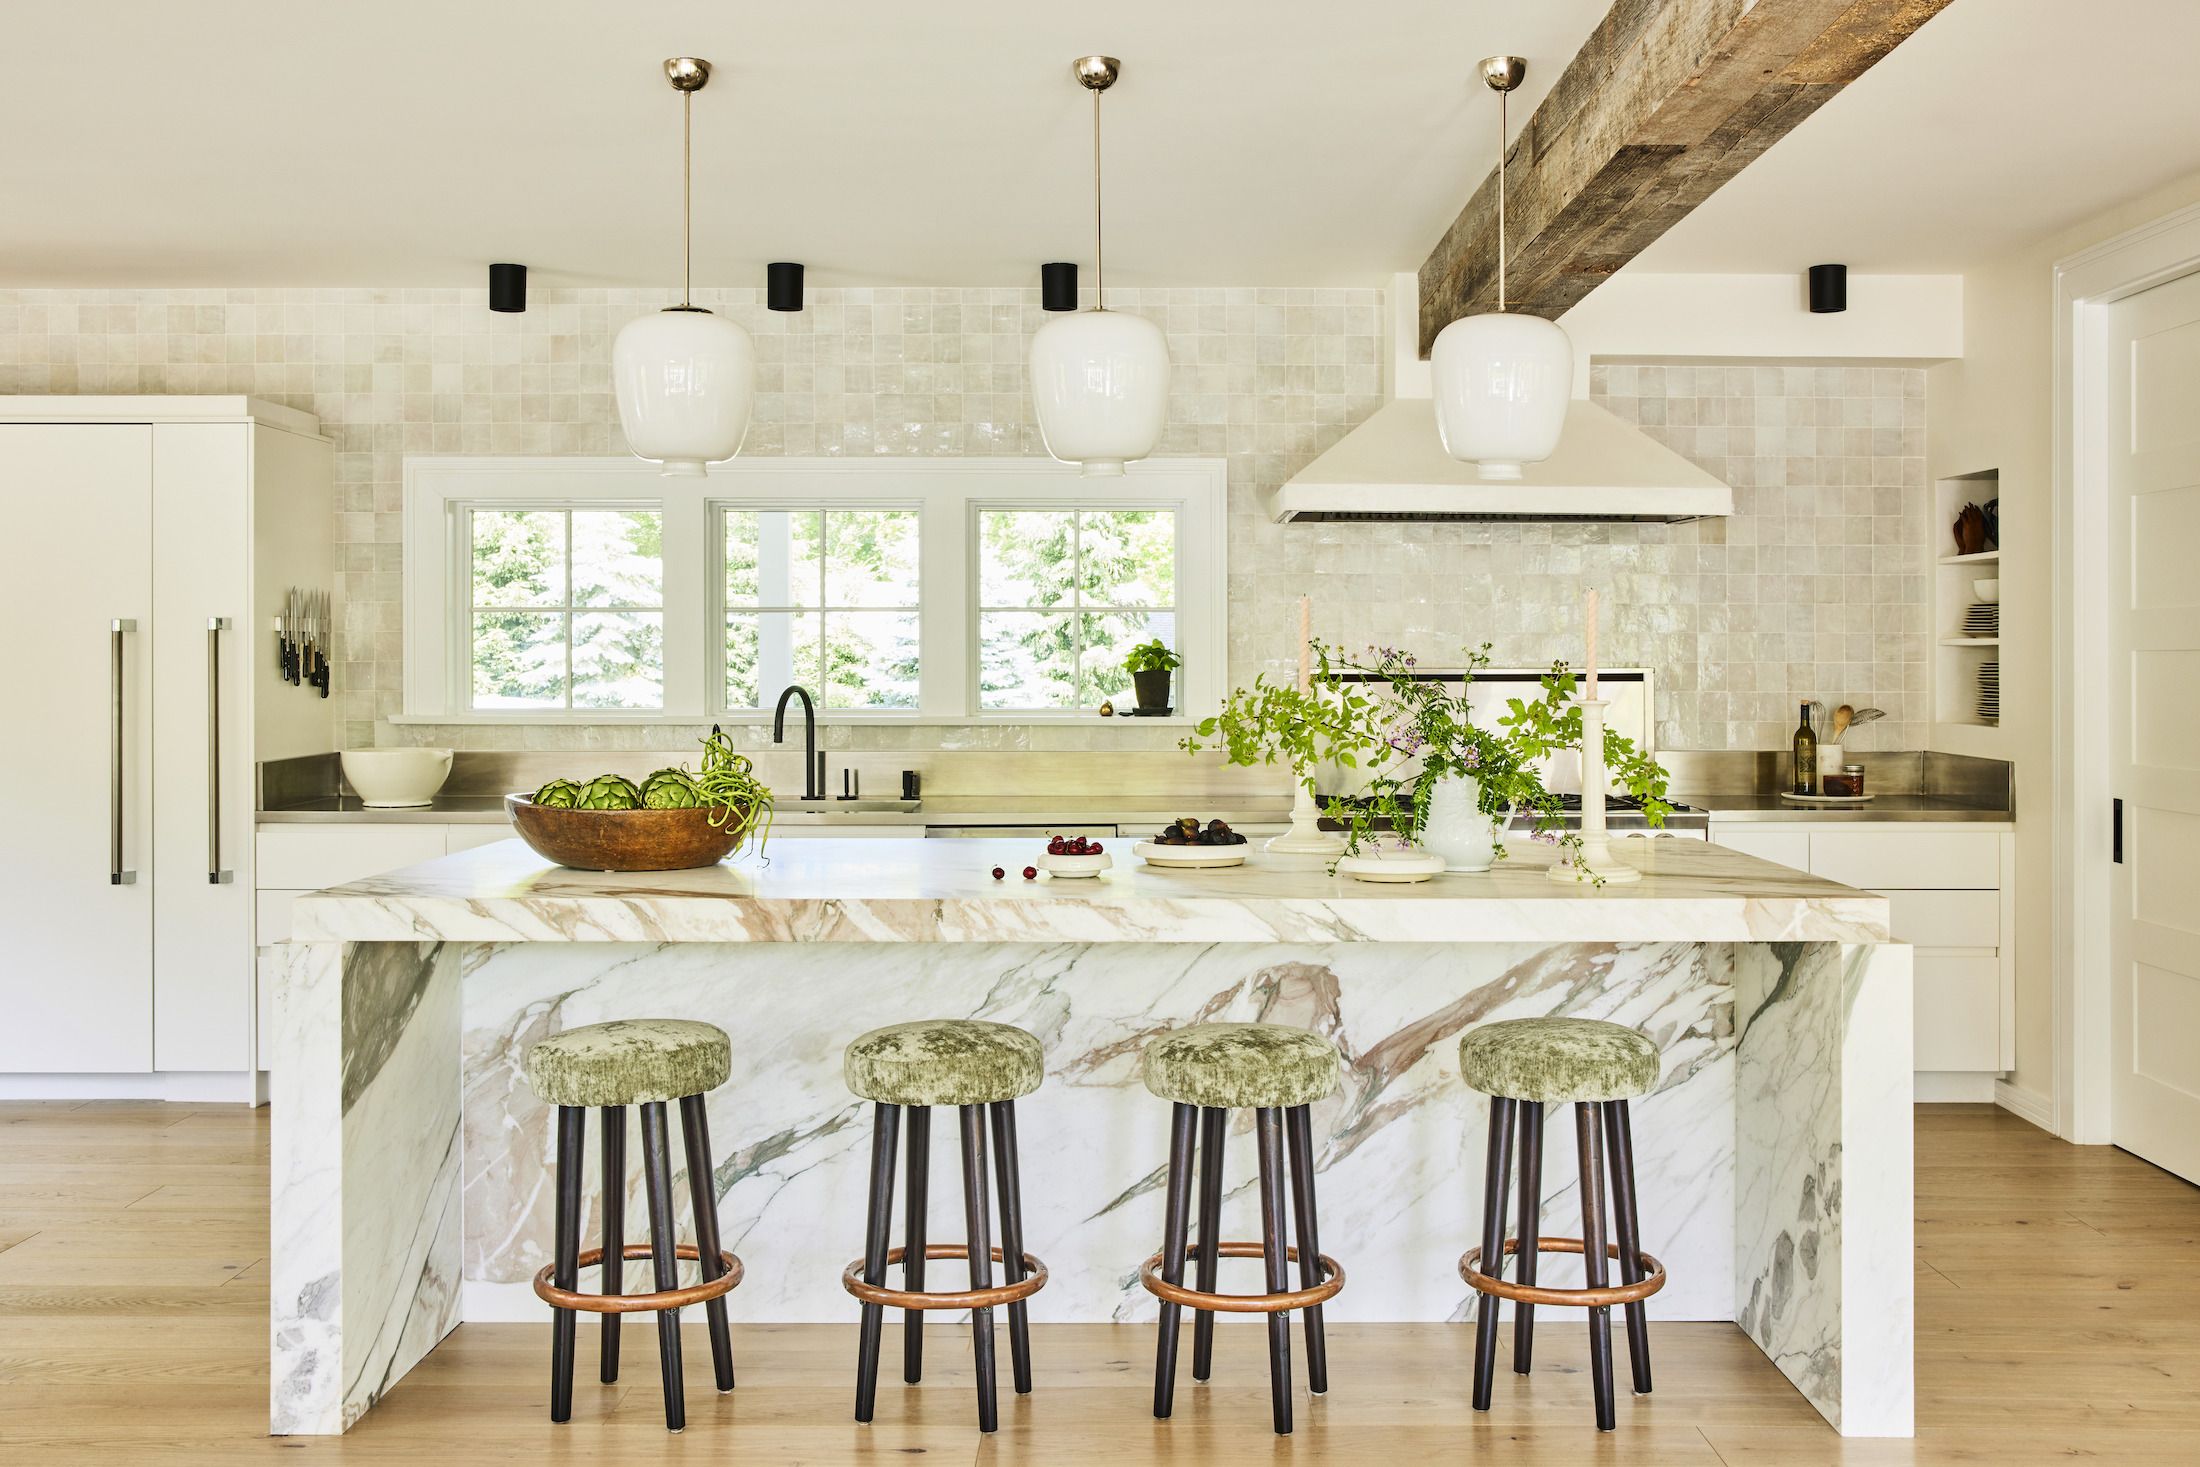 100 Kitchen Design & Remodeling Ideas - Pictures of Beautiful Kitchens